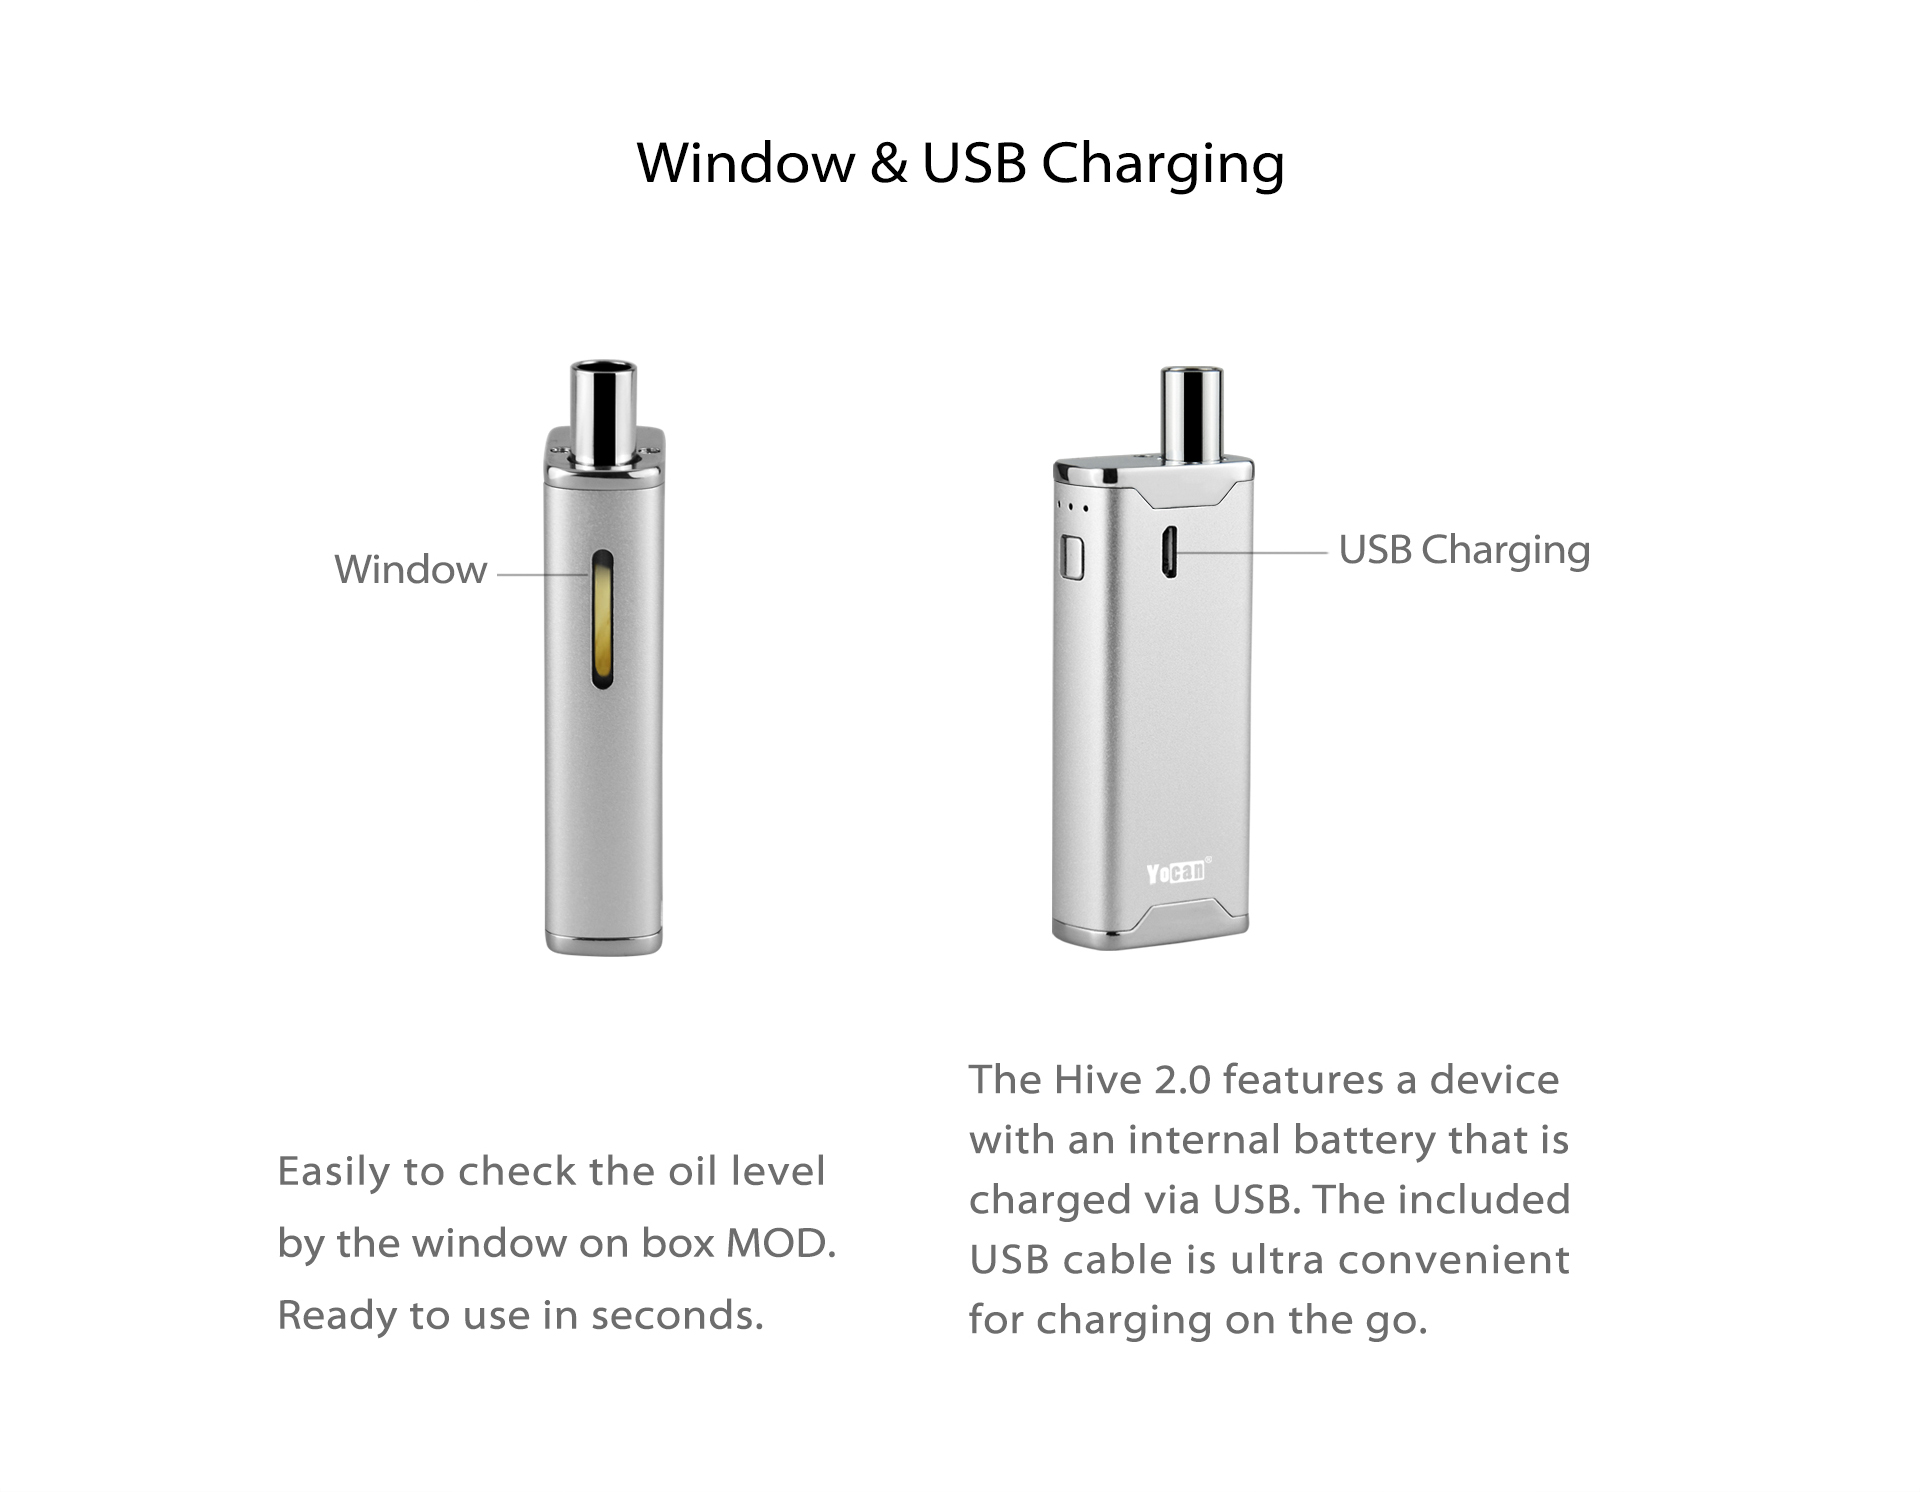 The Hive 2.0 features an internal battery that is charged via USB.